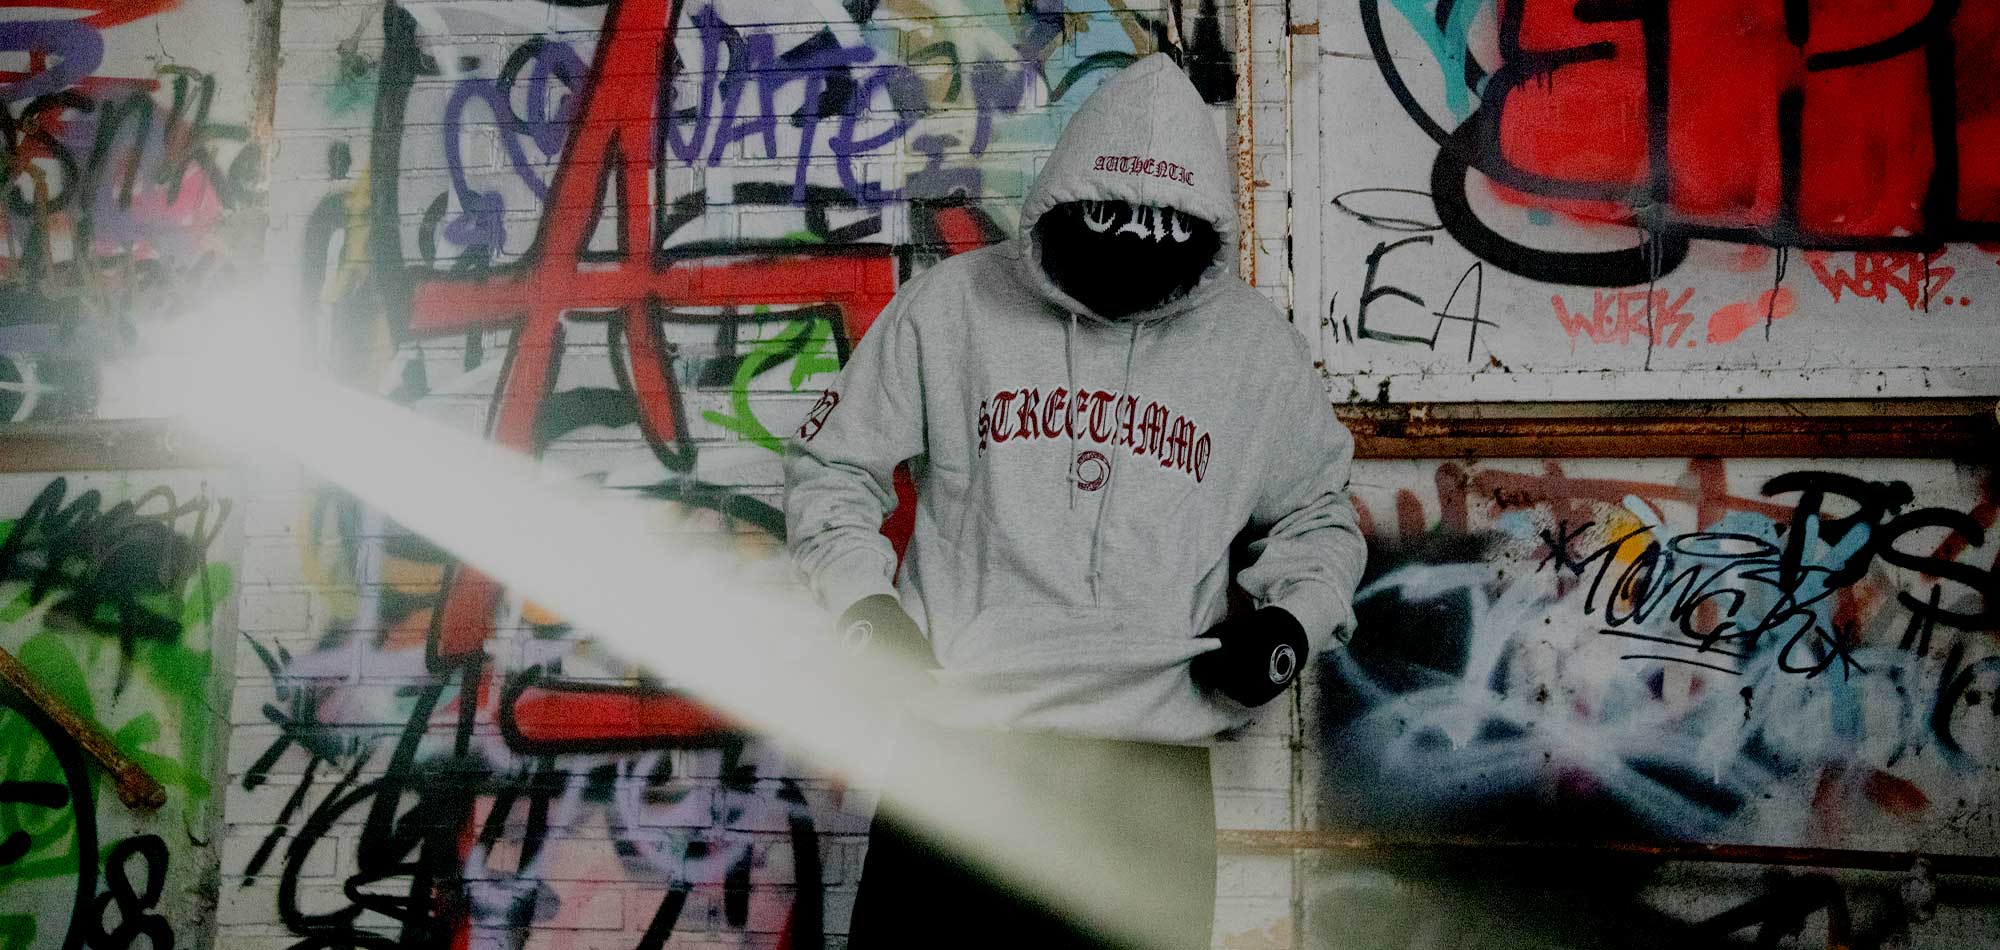 Rear view of a hip hop graffiti sprayer with baggy pants and hoody